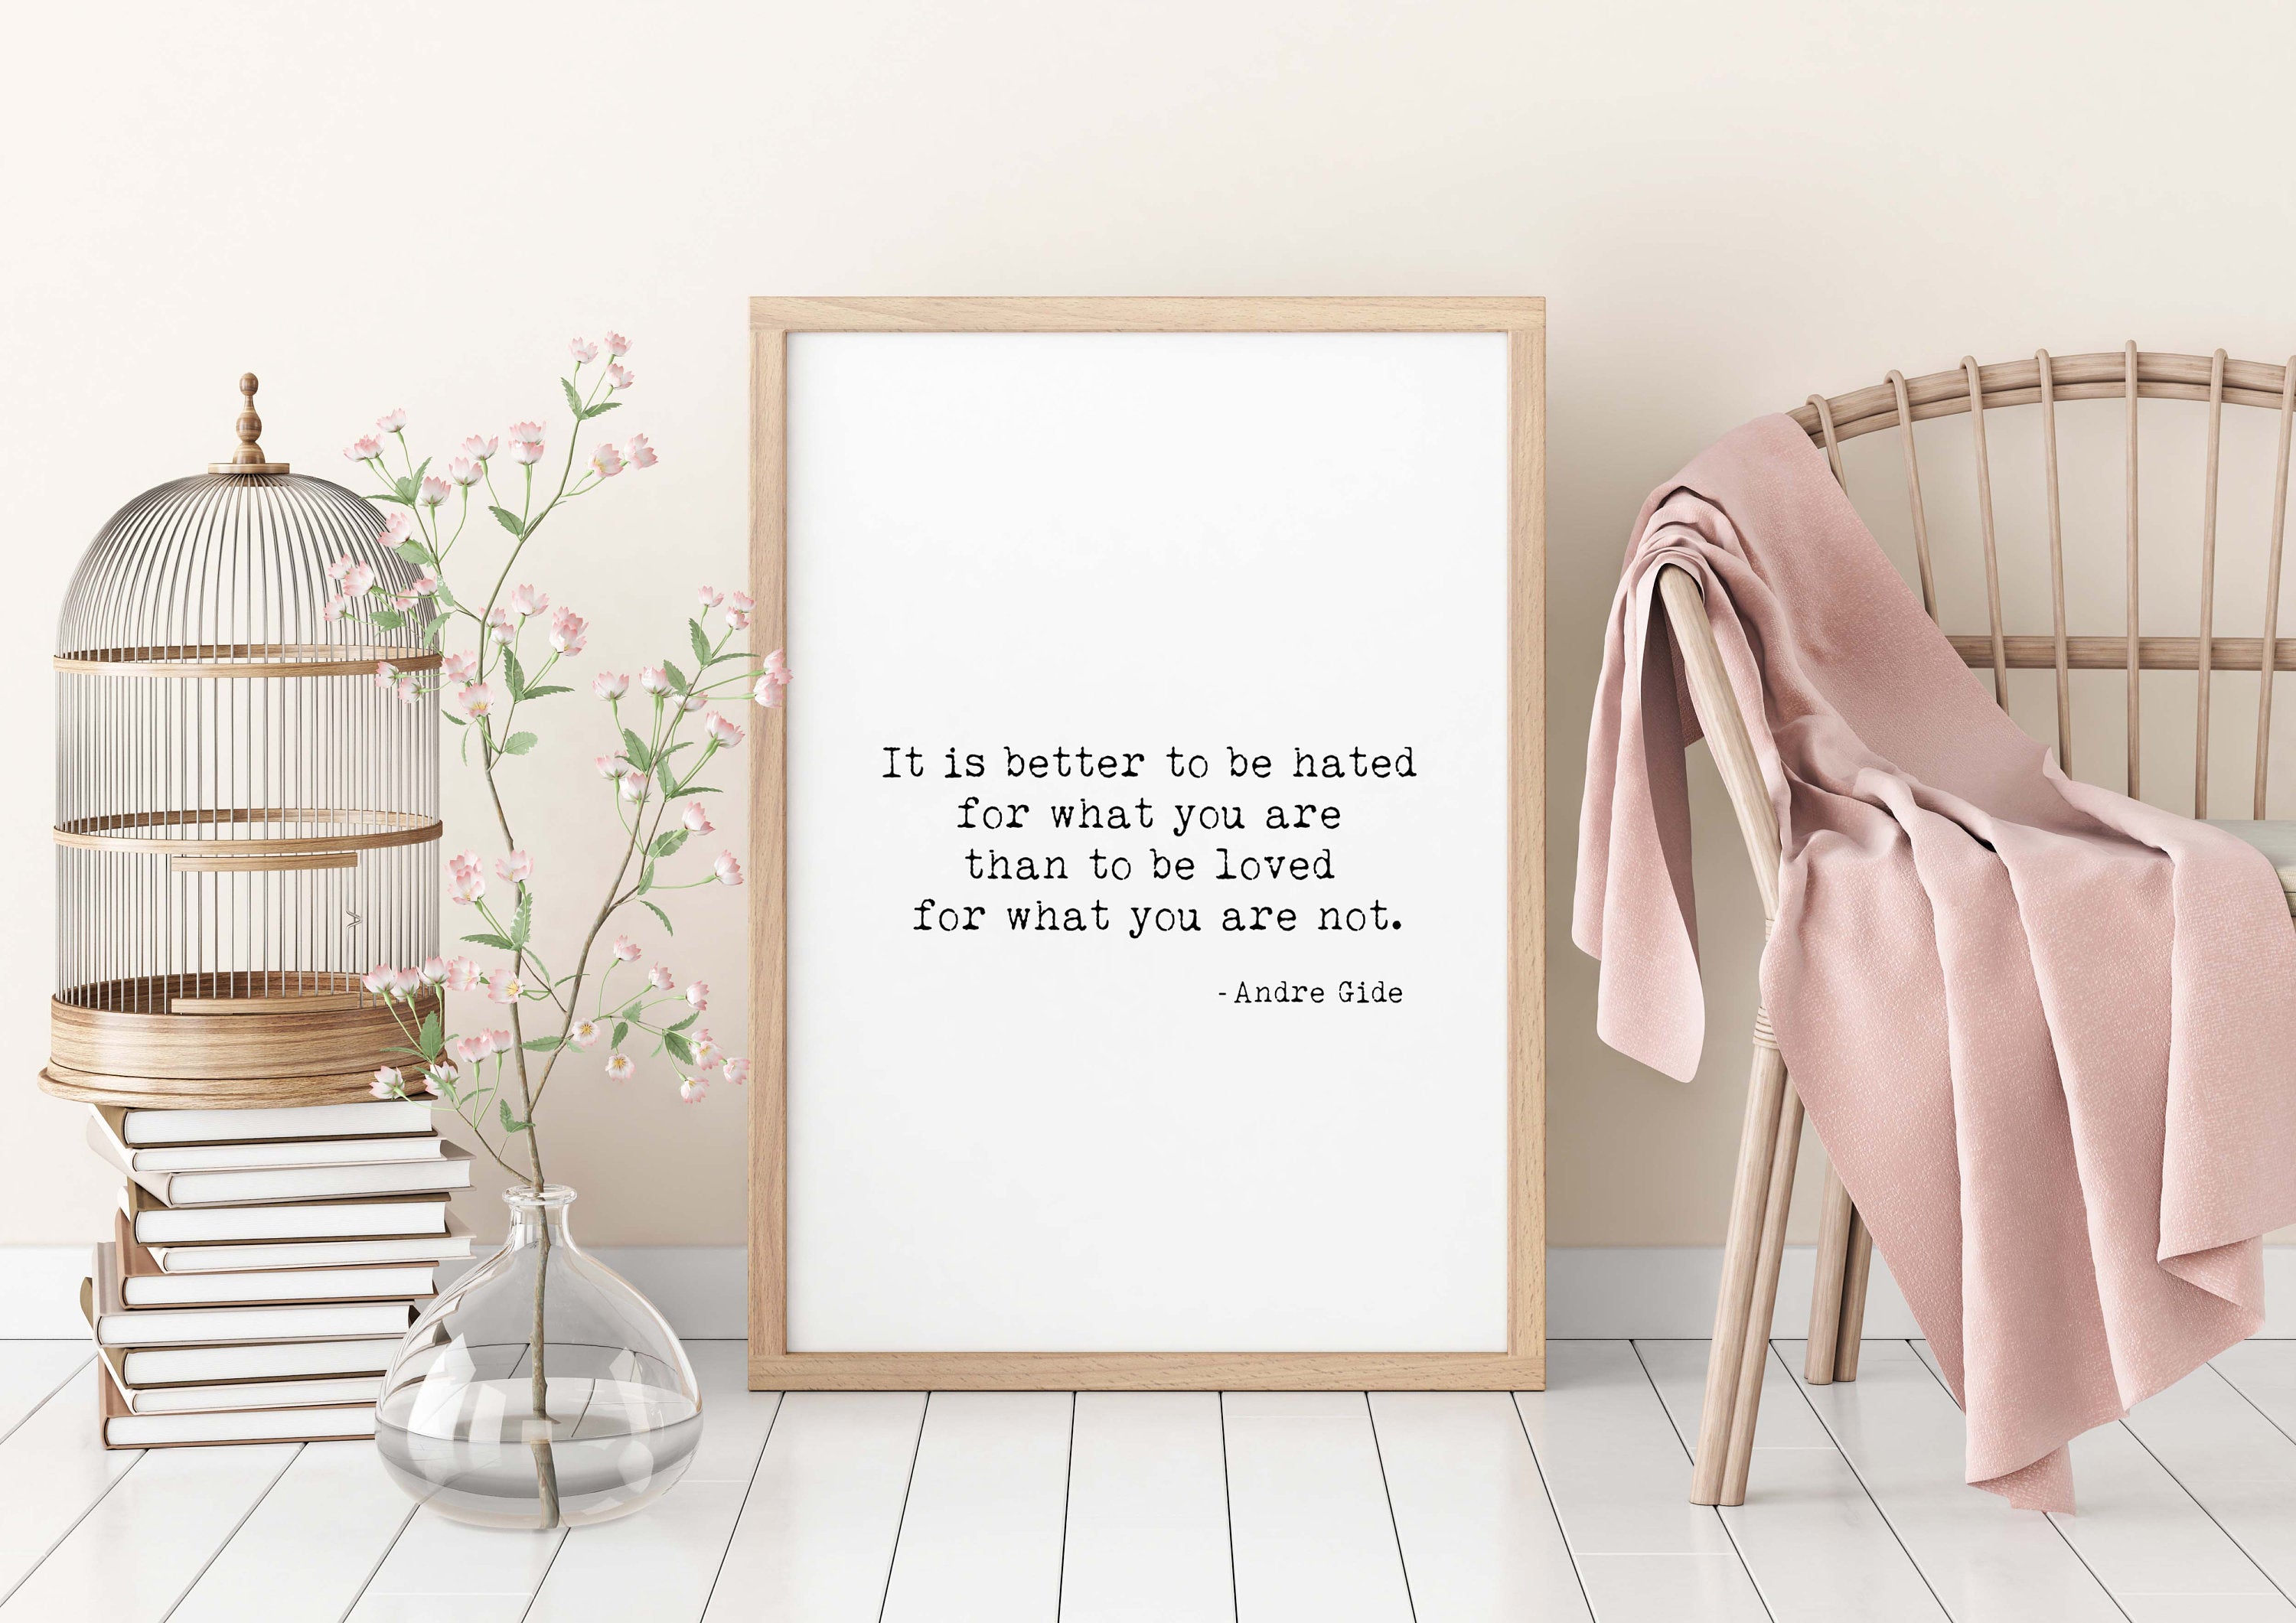 Andre Gide Quote Print, It Is Better To Be Hated For What You Are - BookQuoteDecor